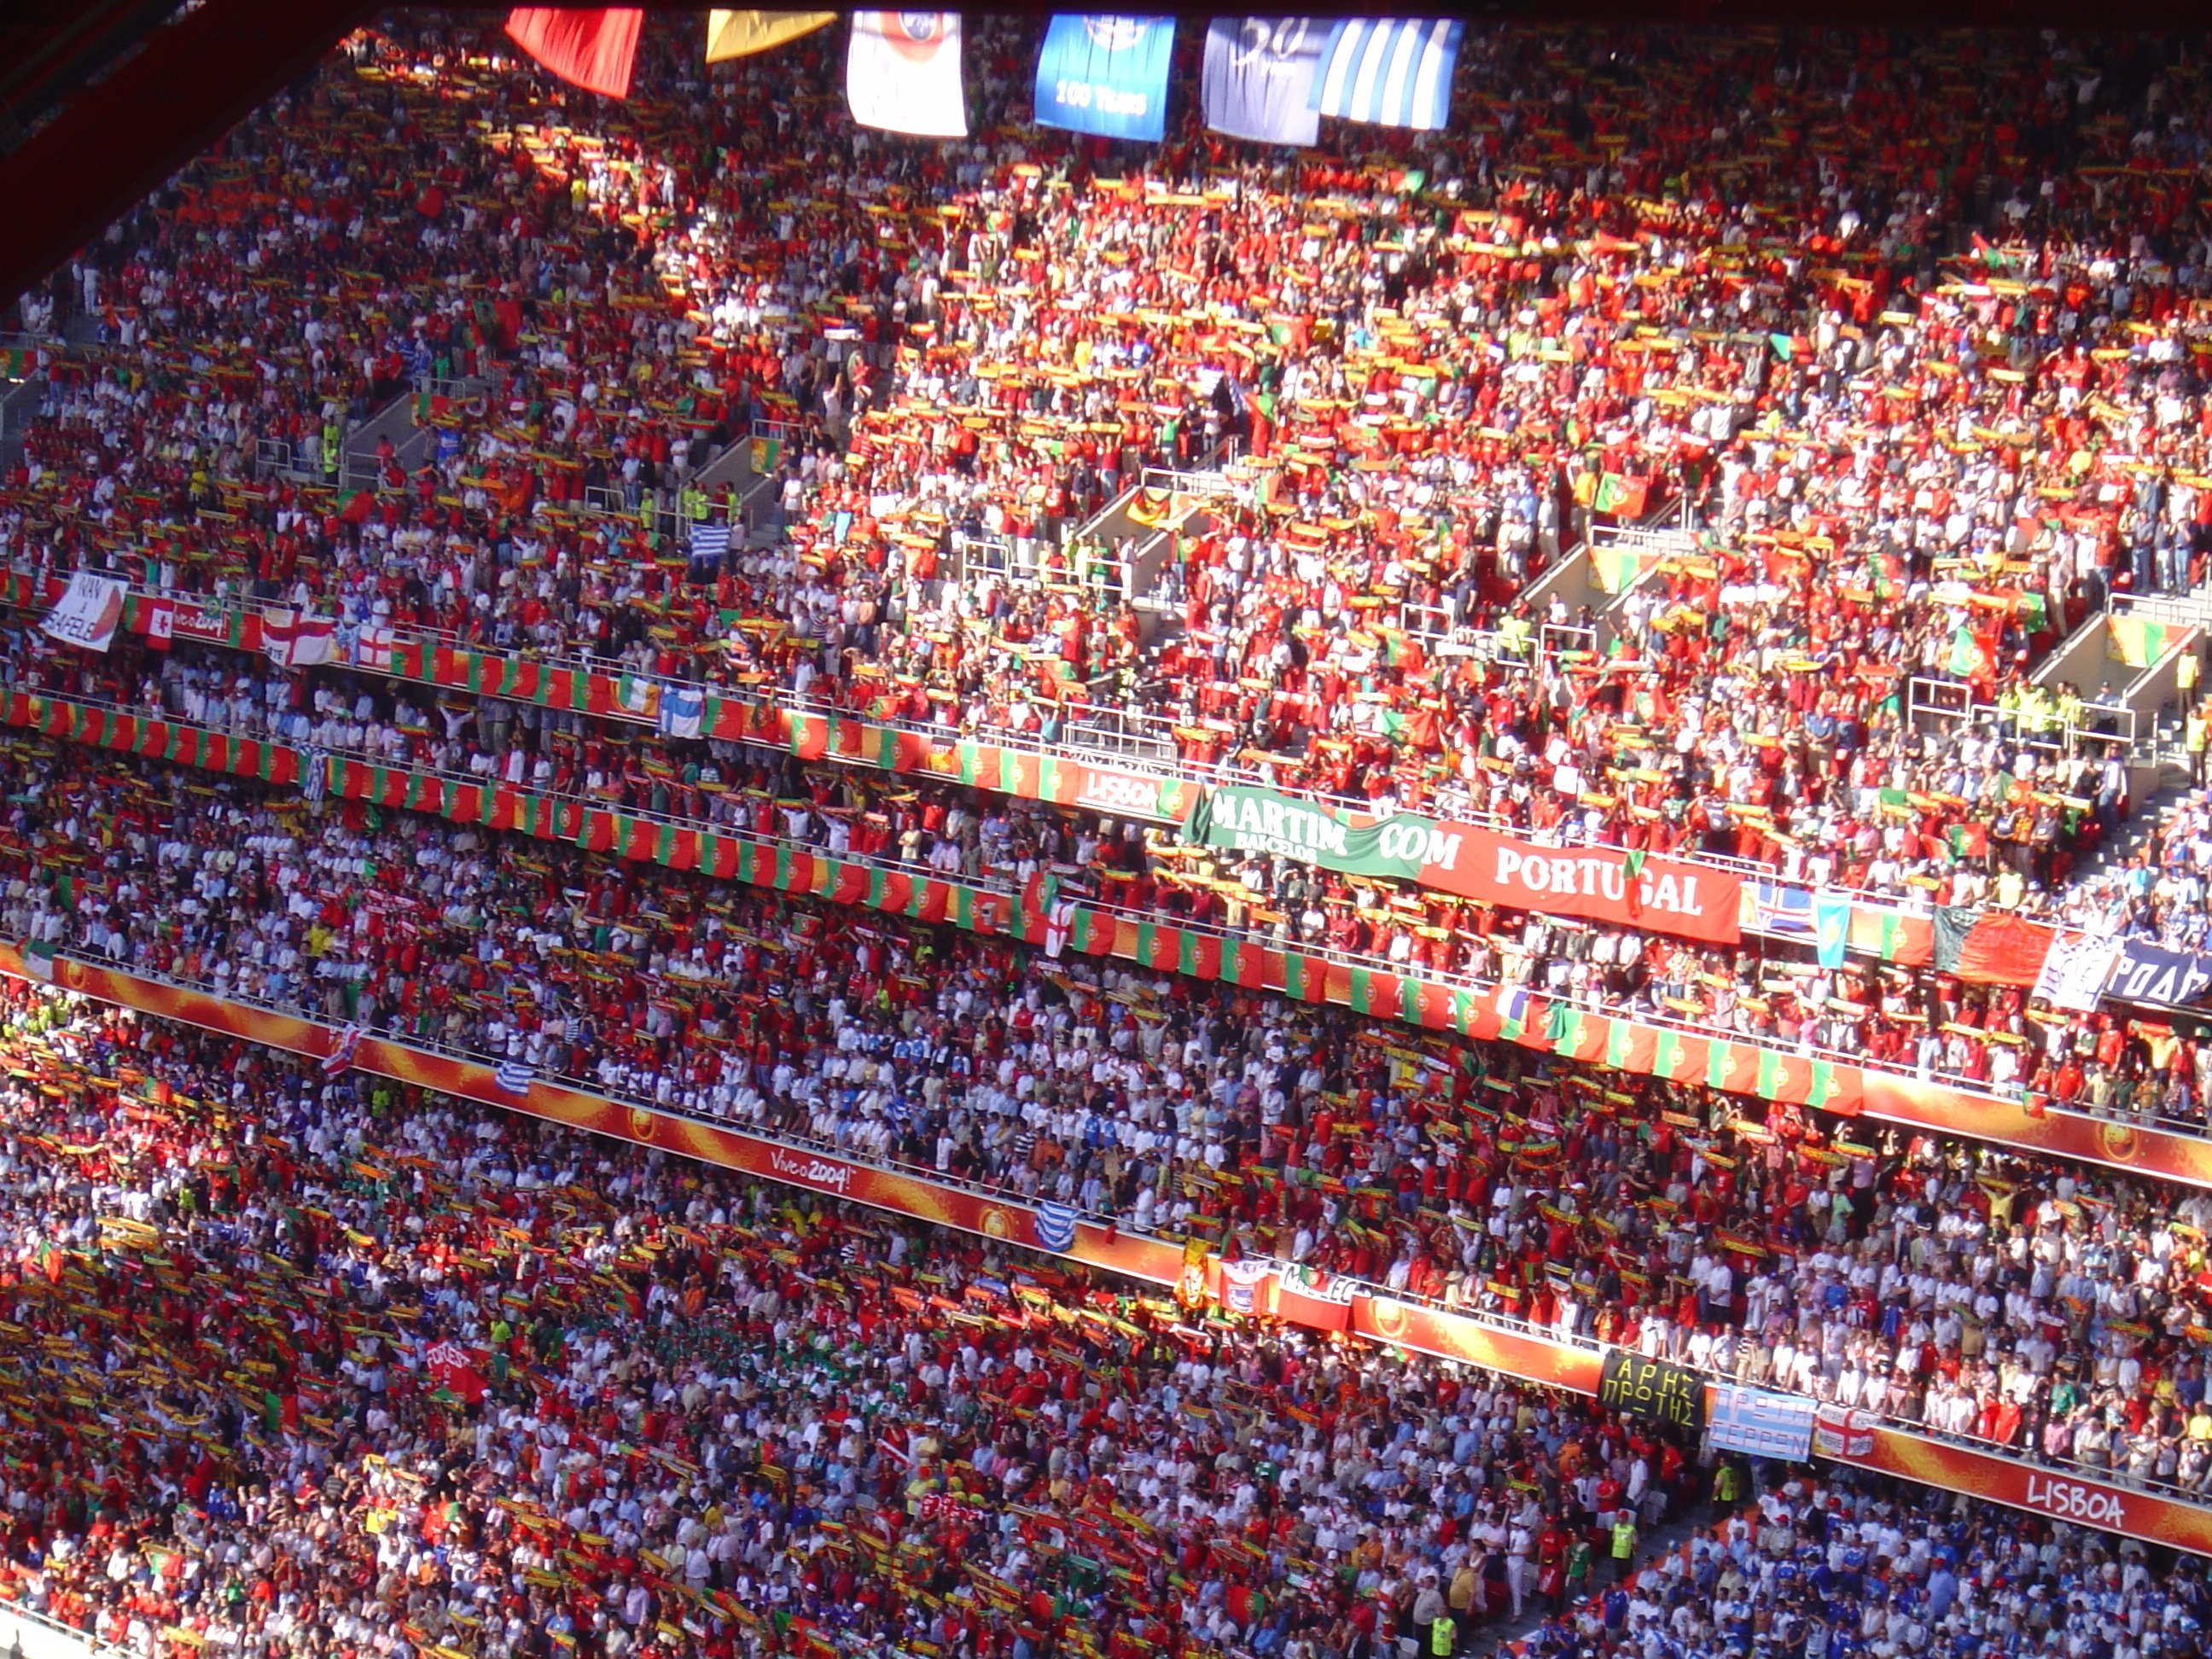 Photo of a packed stadium to illustrate high background noise